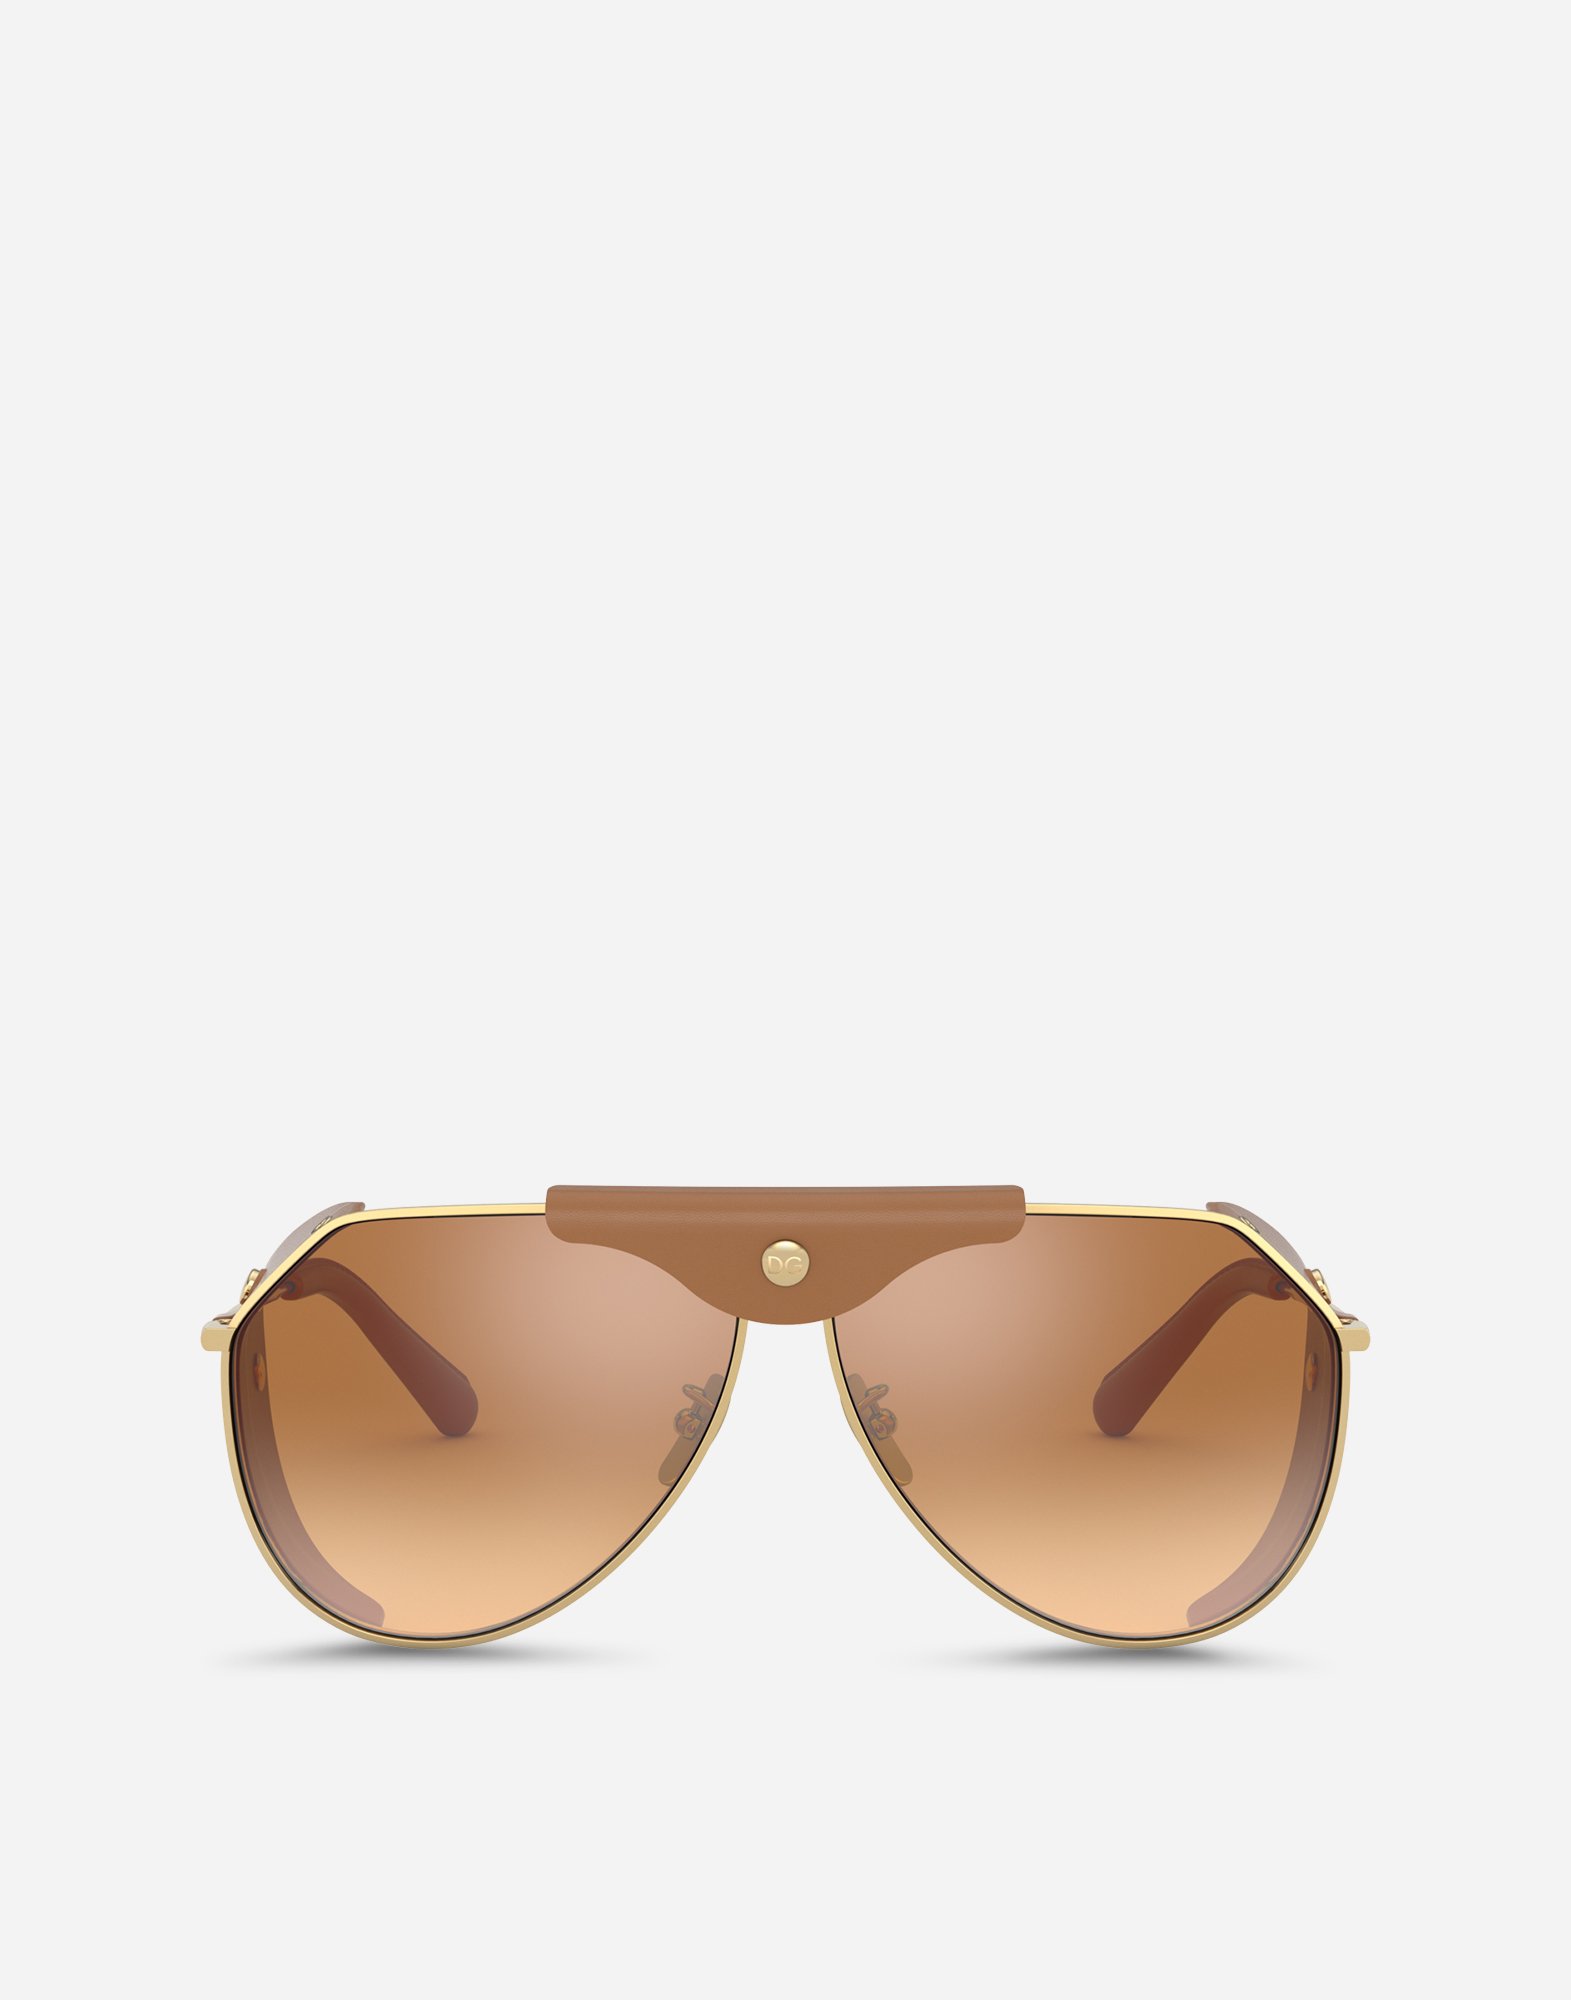 Panama sunglasses in Gold and Camel